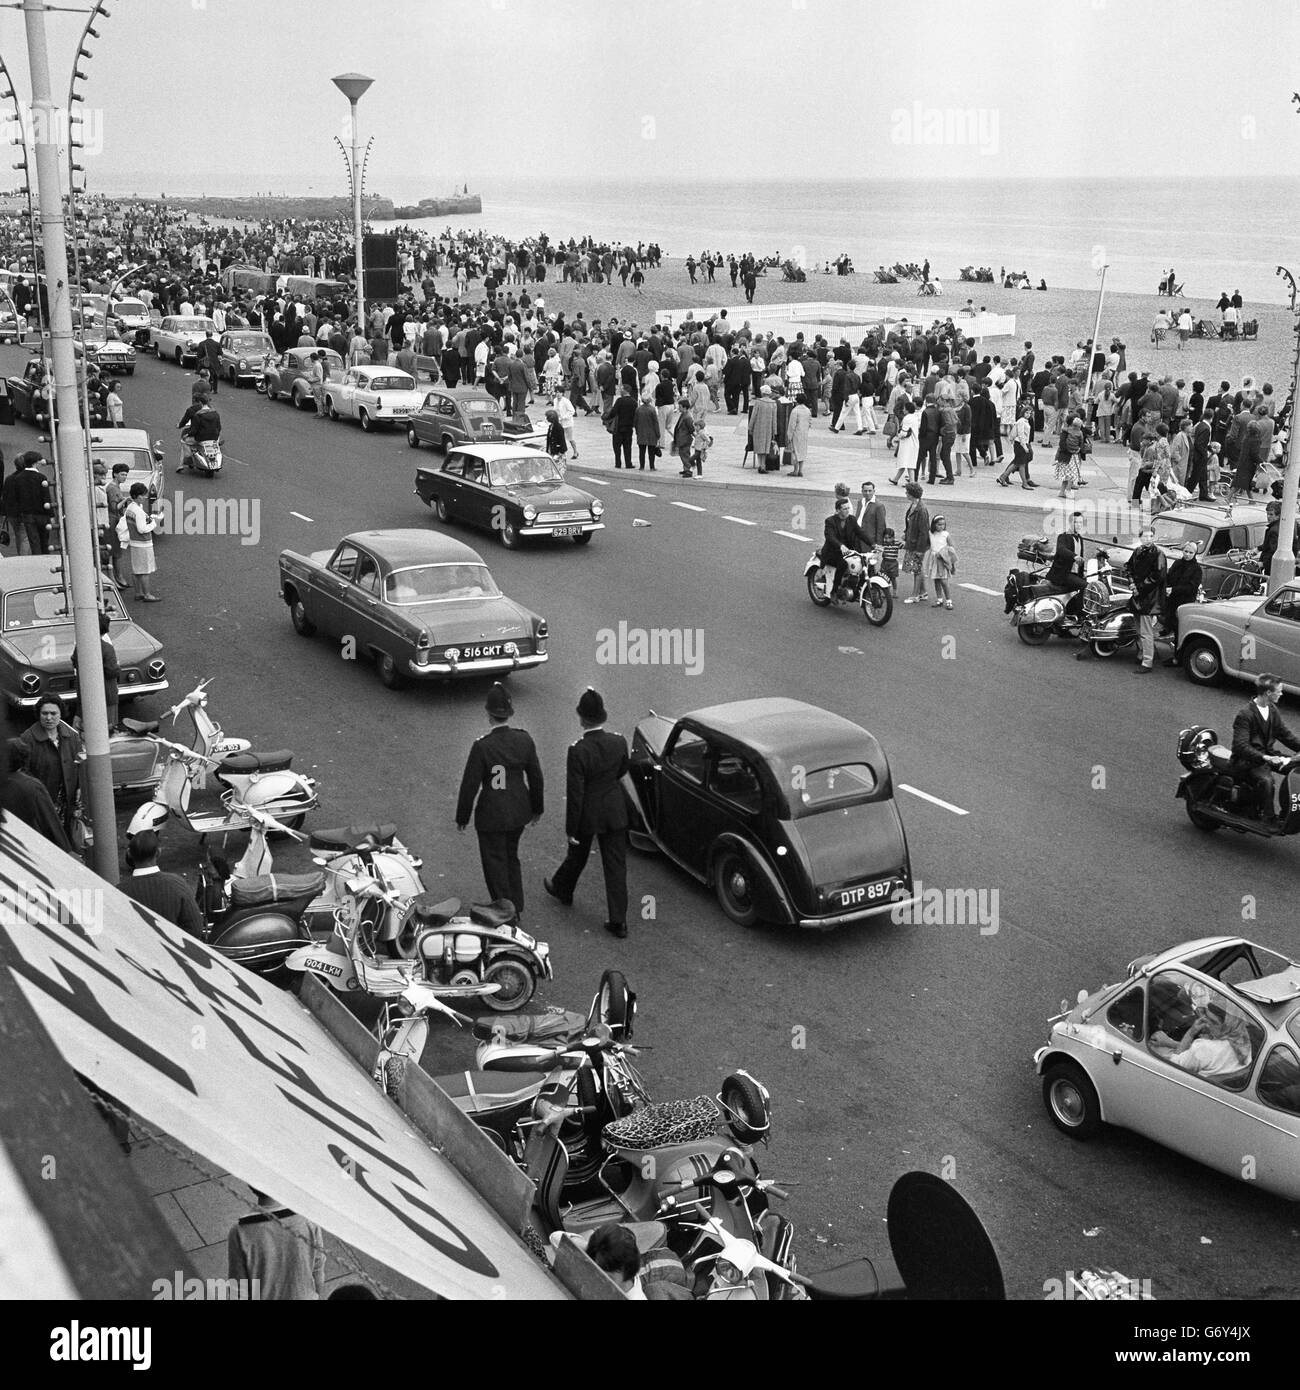 Extra police were required at Hastings, after outbreaks of trouble between Mods and Rockers, who descended on the Sussex resort. Stock Photo